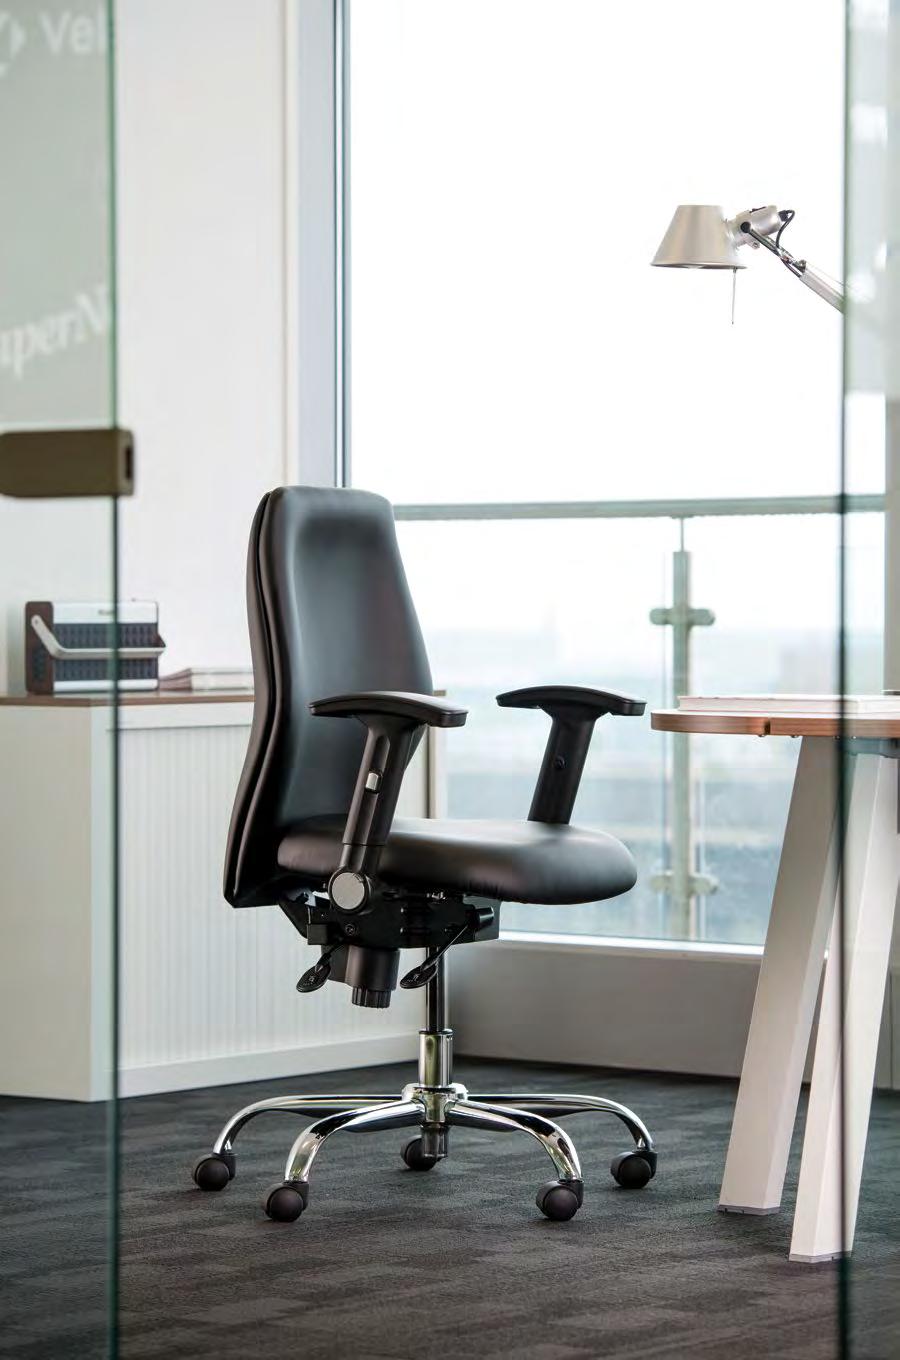 155 Task & Visitor Seating Physio PH2 PH1 Physio Ergonomic Task Chair Featuring a unique anatomically designed cut foam back and dual density moulded memory foam seat, the Physio has been developed